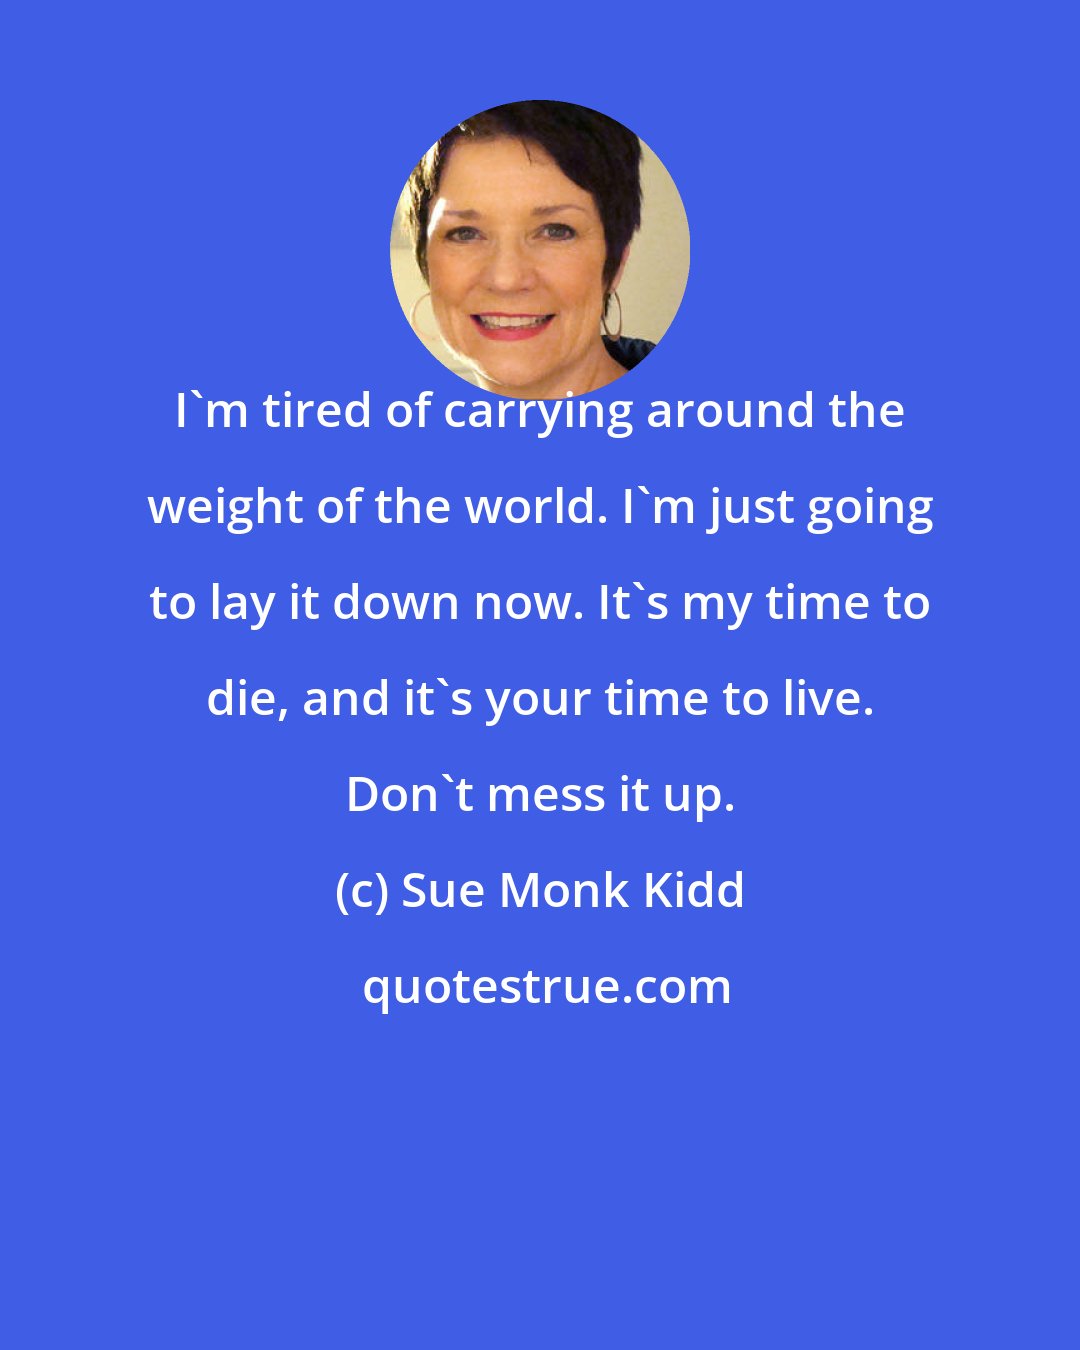 Sue Monk Kidd: I'm tired of carrying around the weight of the world. I'm just going to lay it down now. It's my time to die, and it's your time to live. Don't mess it up.